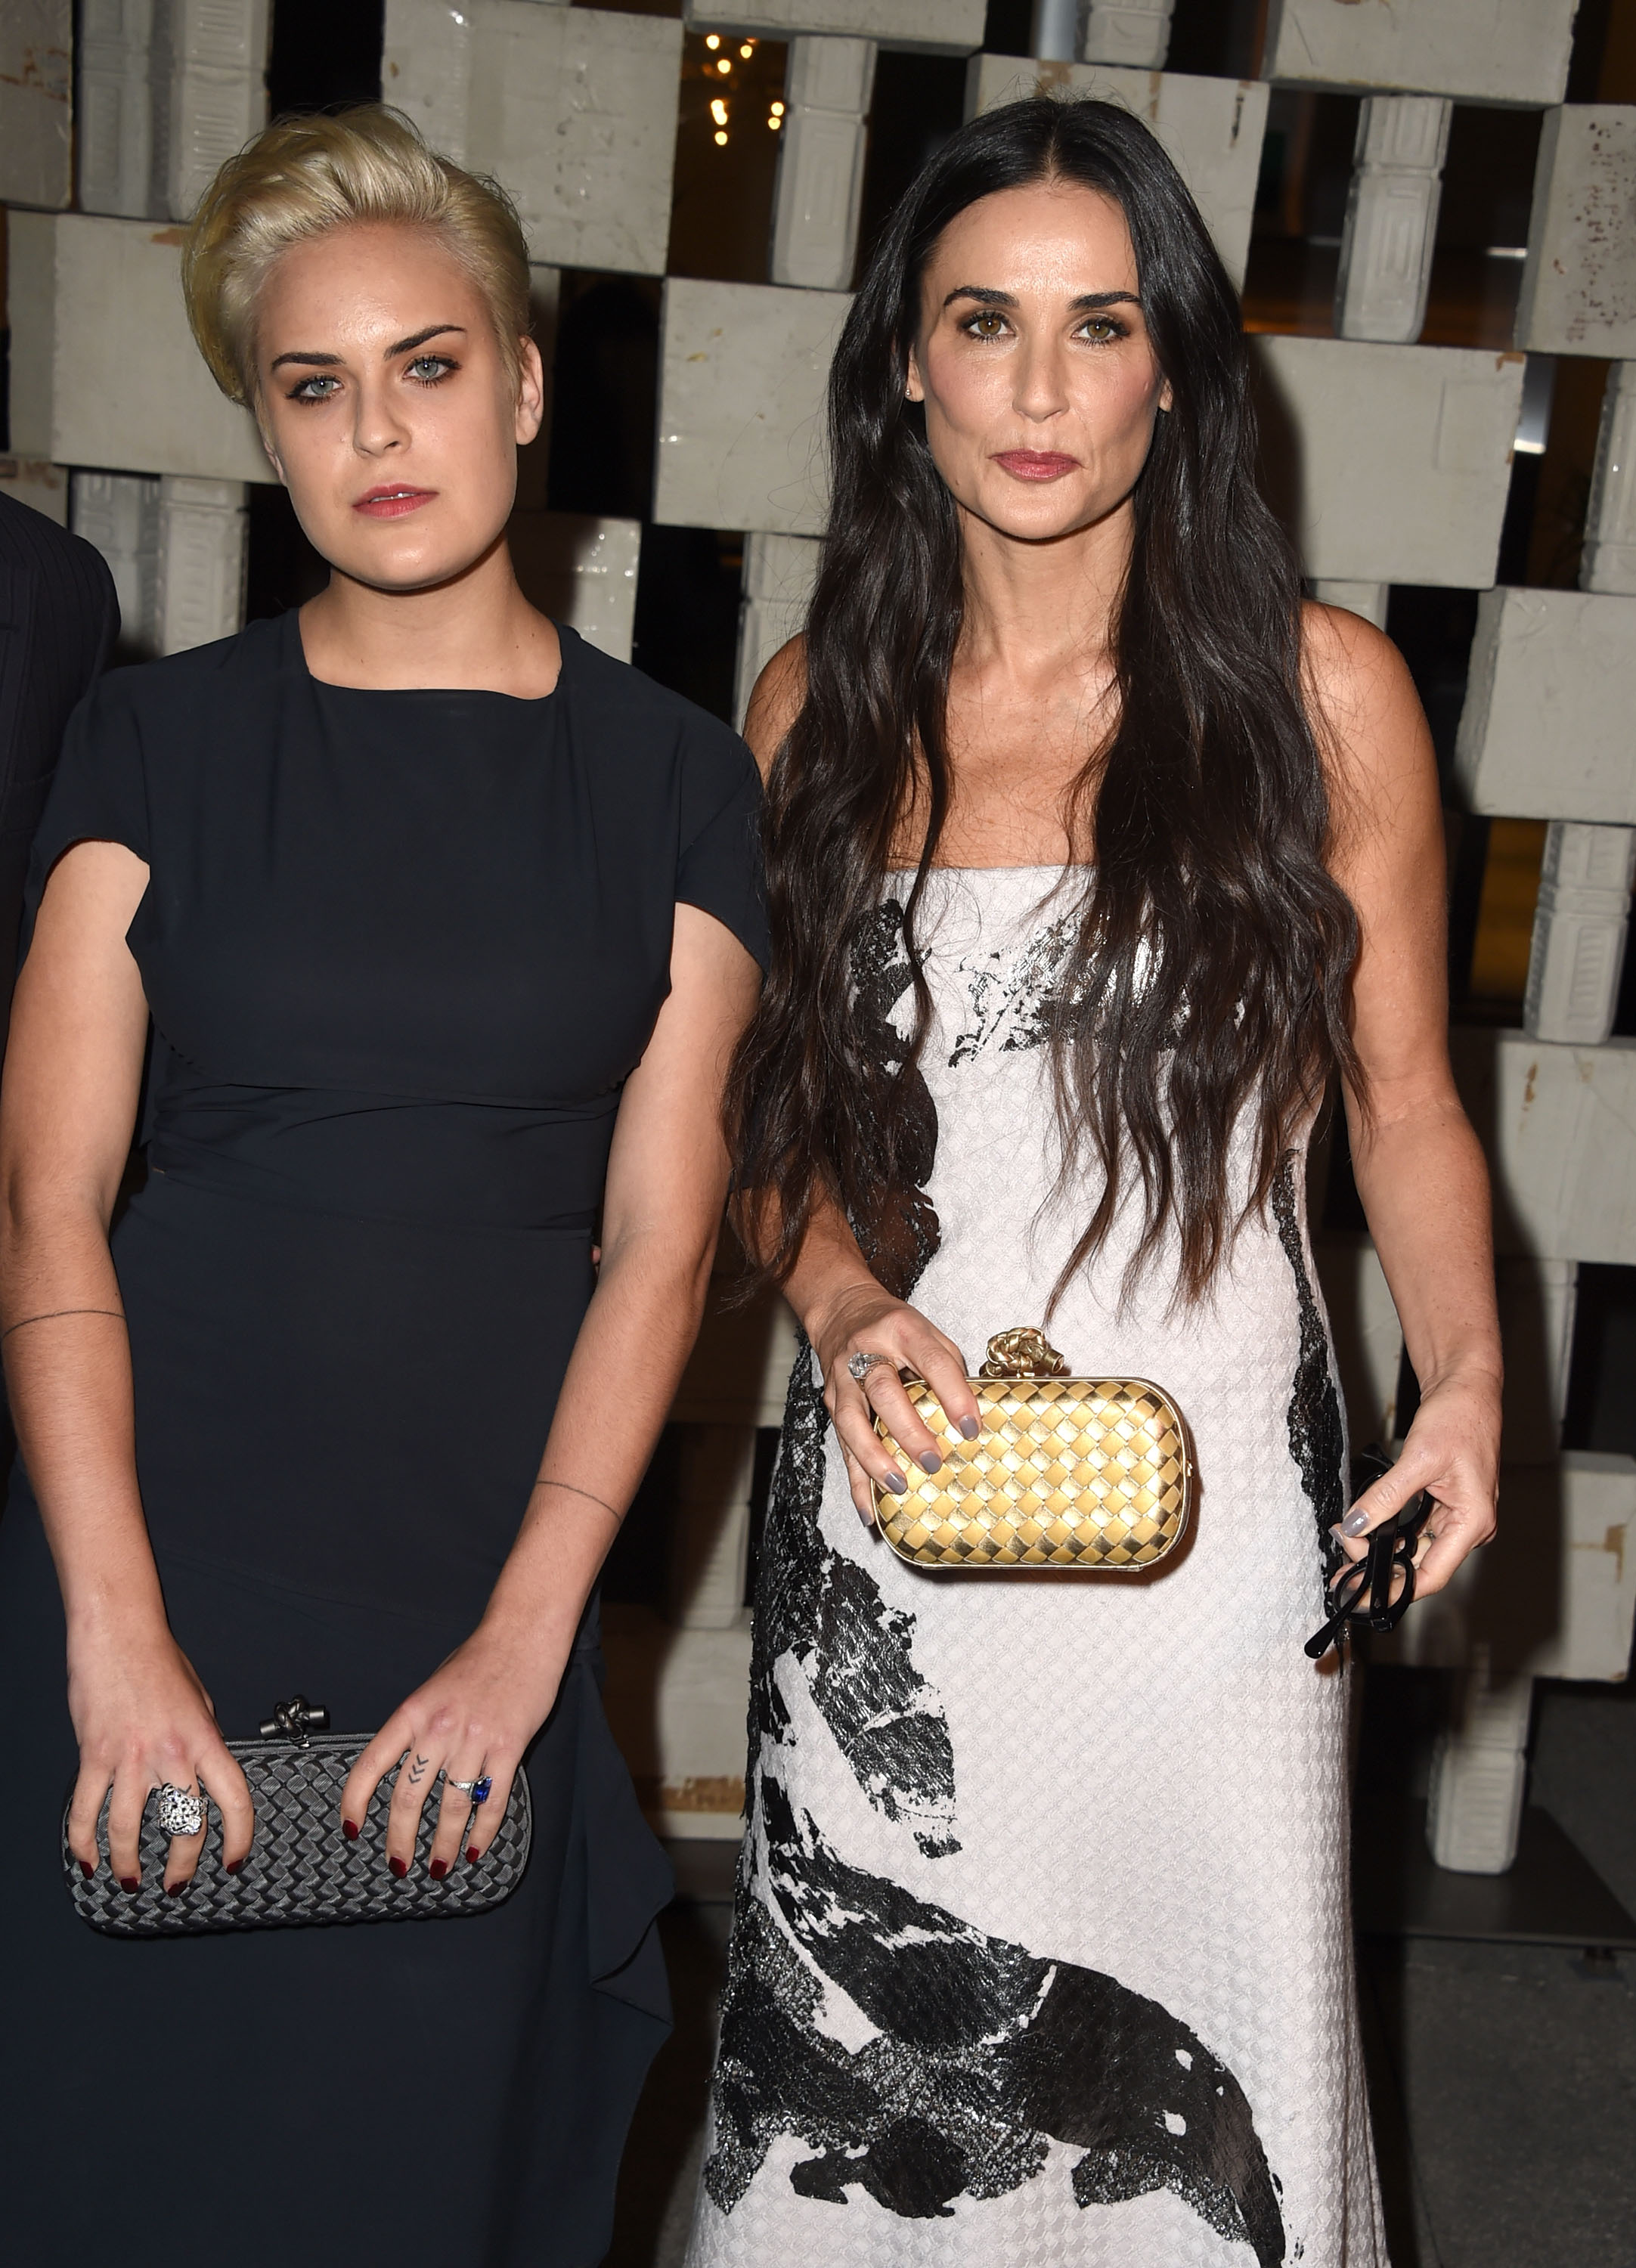 Tallulah Willis and Demi Moore at the Hammer Museum's "Gala In The Garden" honoring Joni Mitchell and Mark Bradford on October 11, 2014 in Westwood, California. | Source: Getty Images